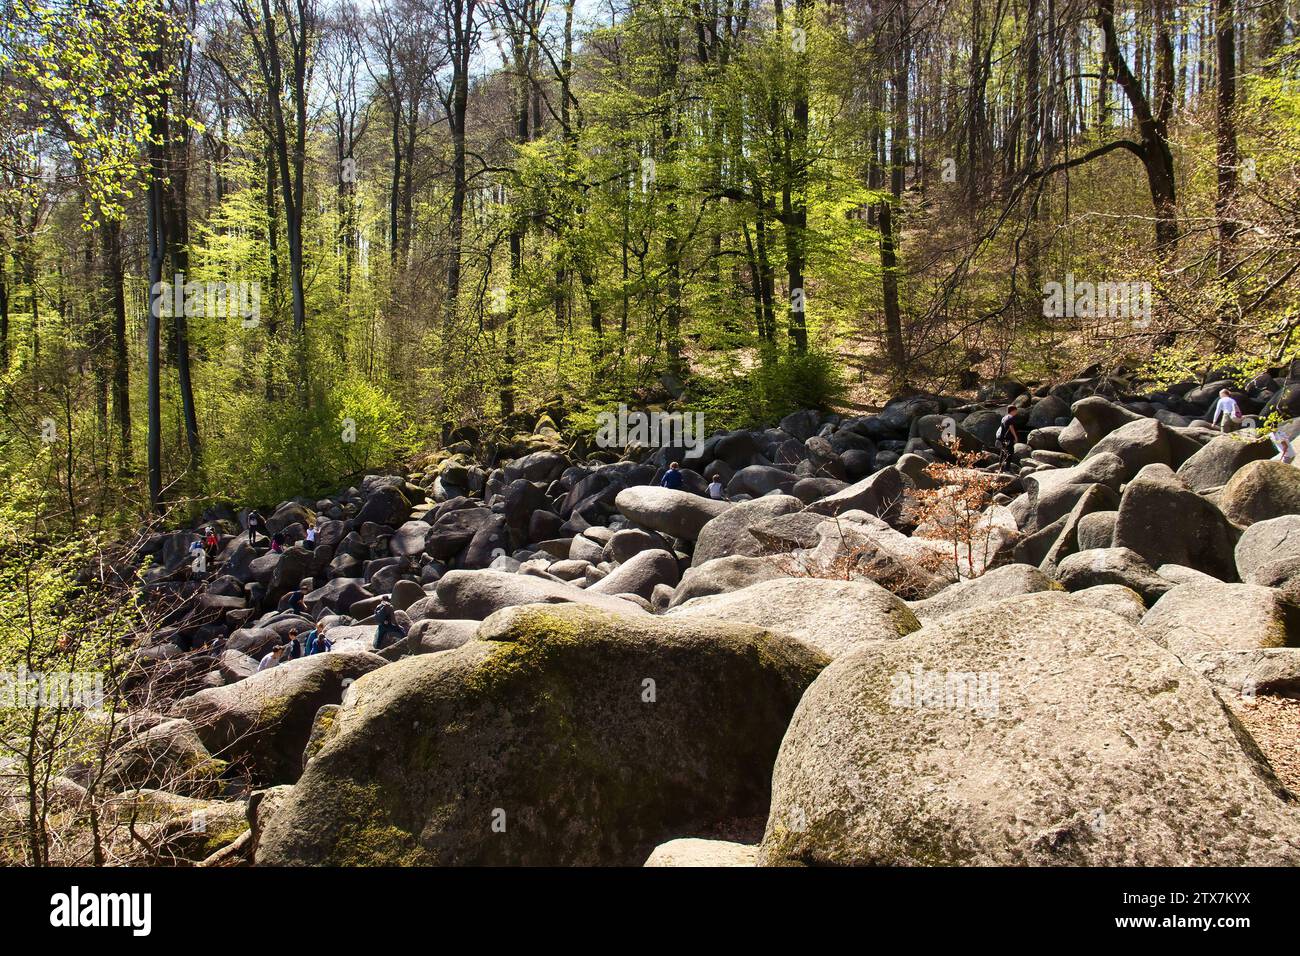 Lautertal, Germany - April 24, 2021: Side of hill covered in large rocks on a spring day at Felsenmeer in Germany. Stock Photo